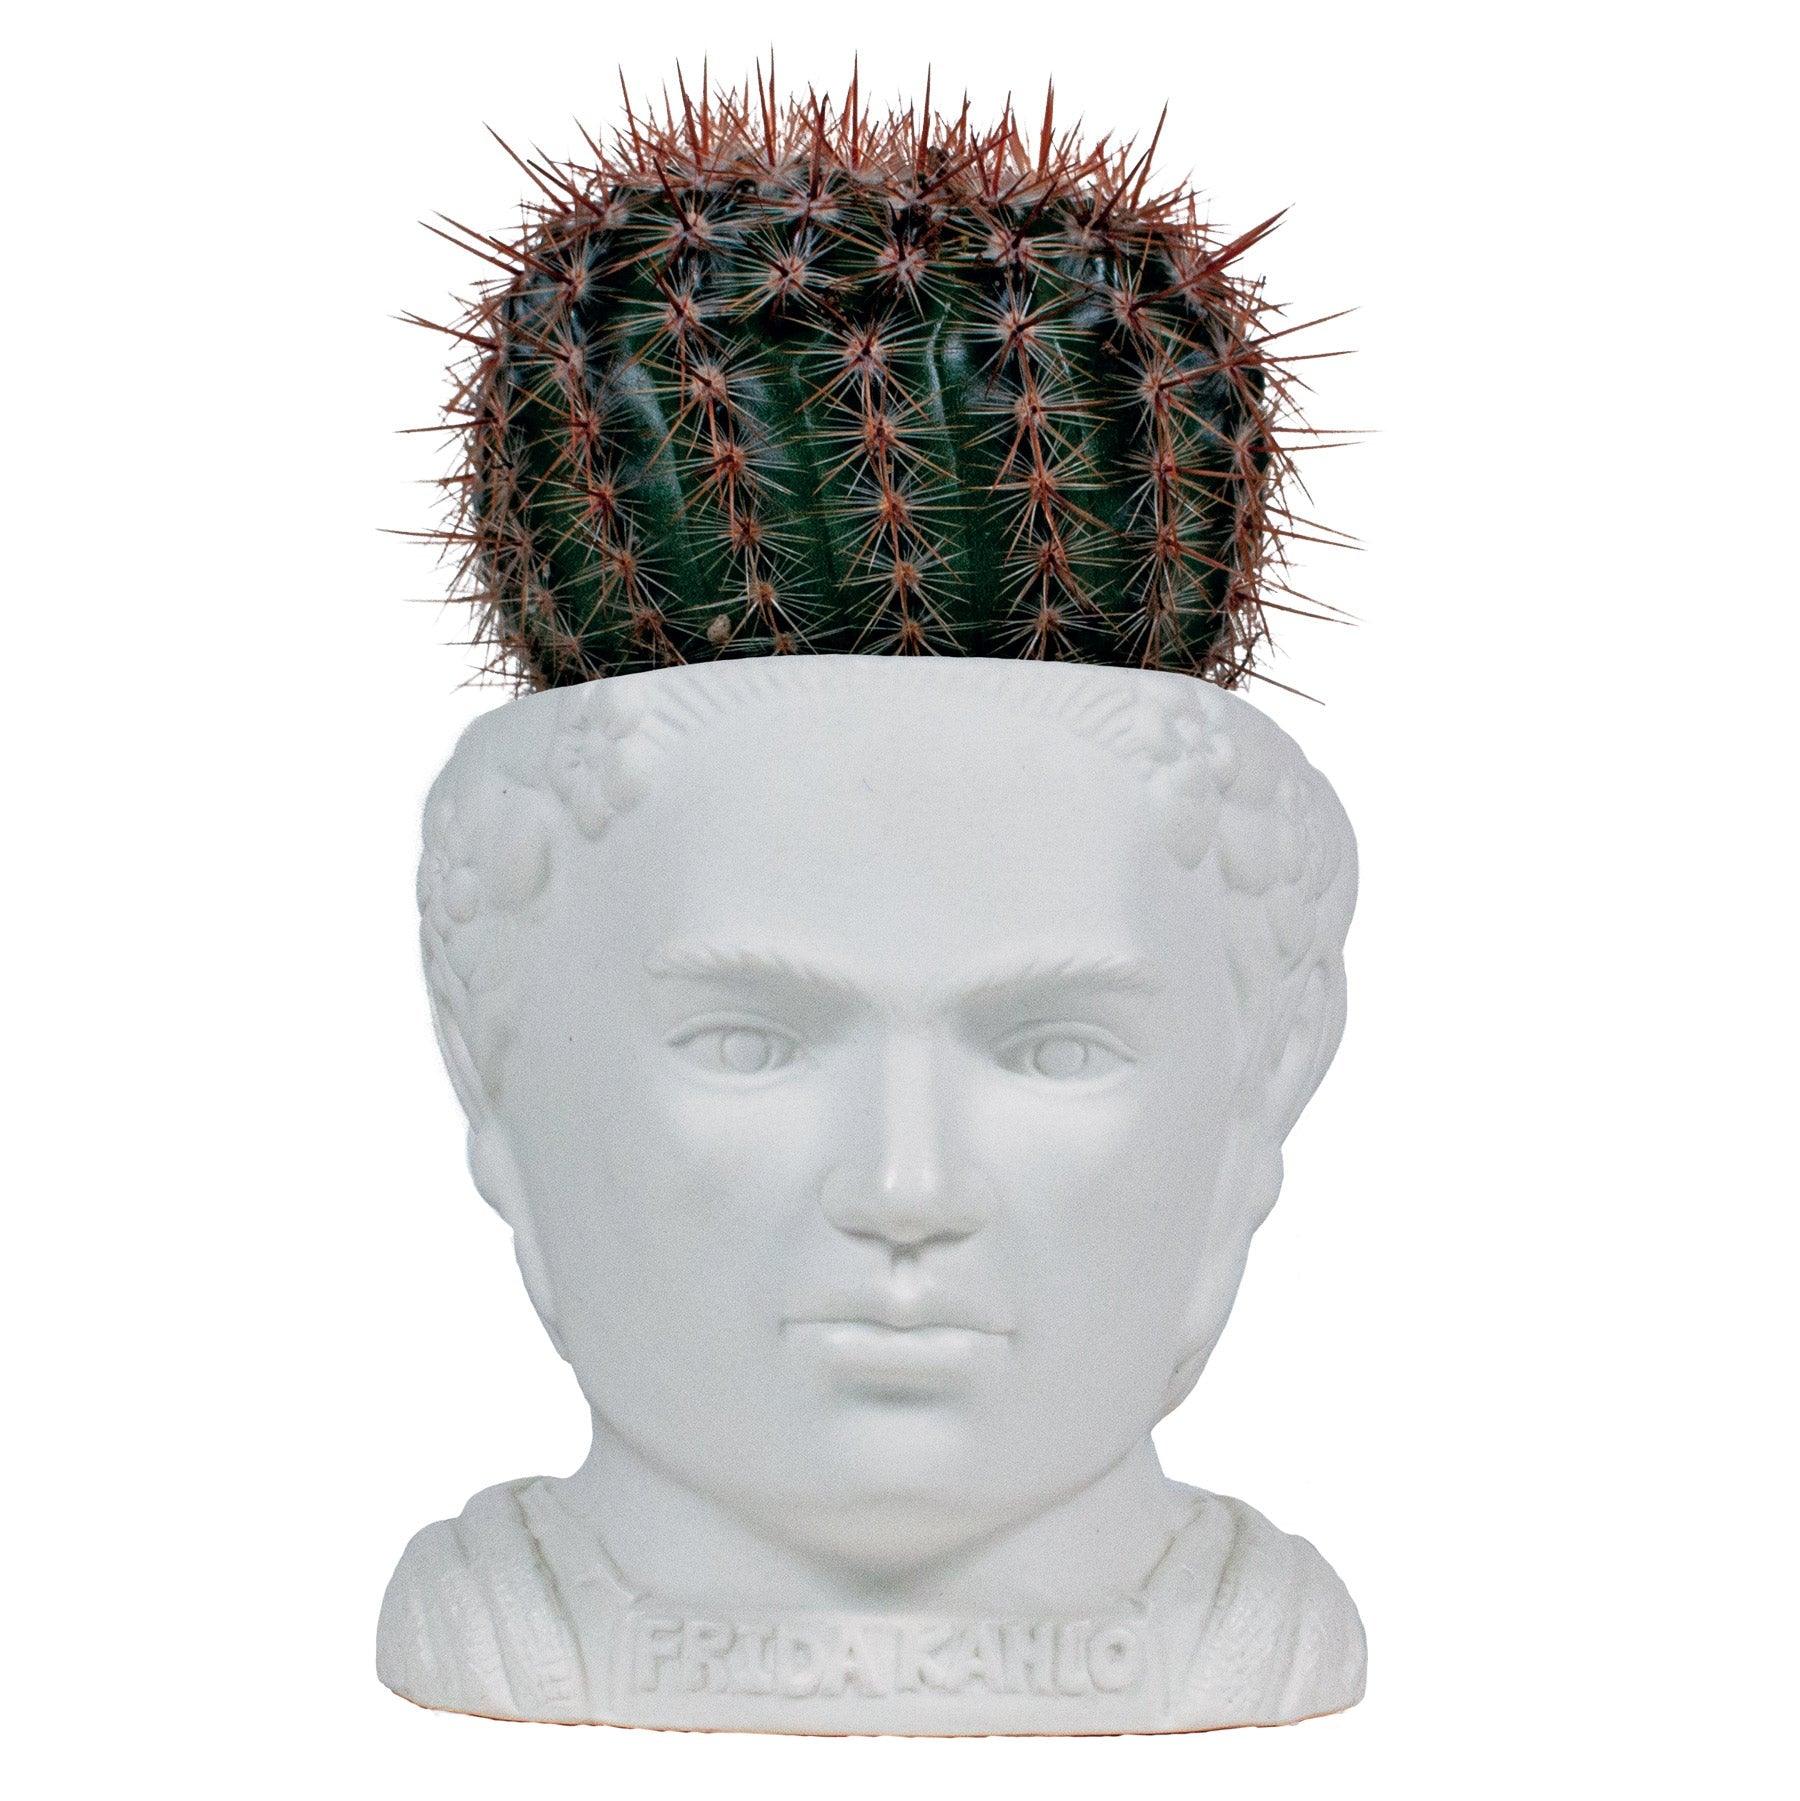 Product photo of Frida Kahlo Bust Planter, a novelty gift manufactured by The Unemployed Philosophers Guild.